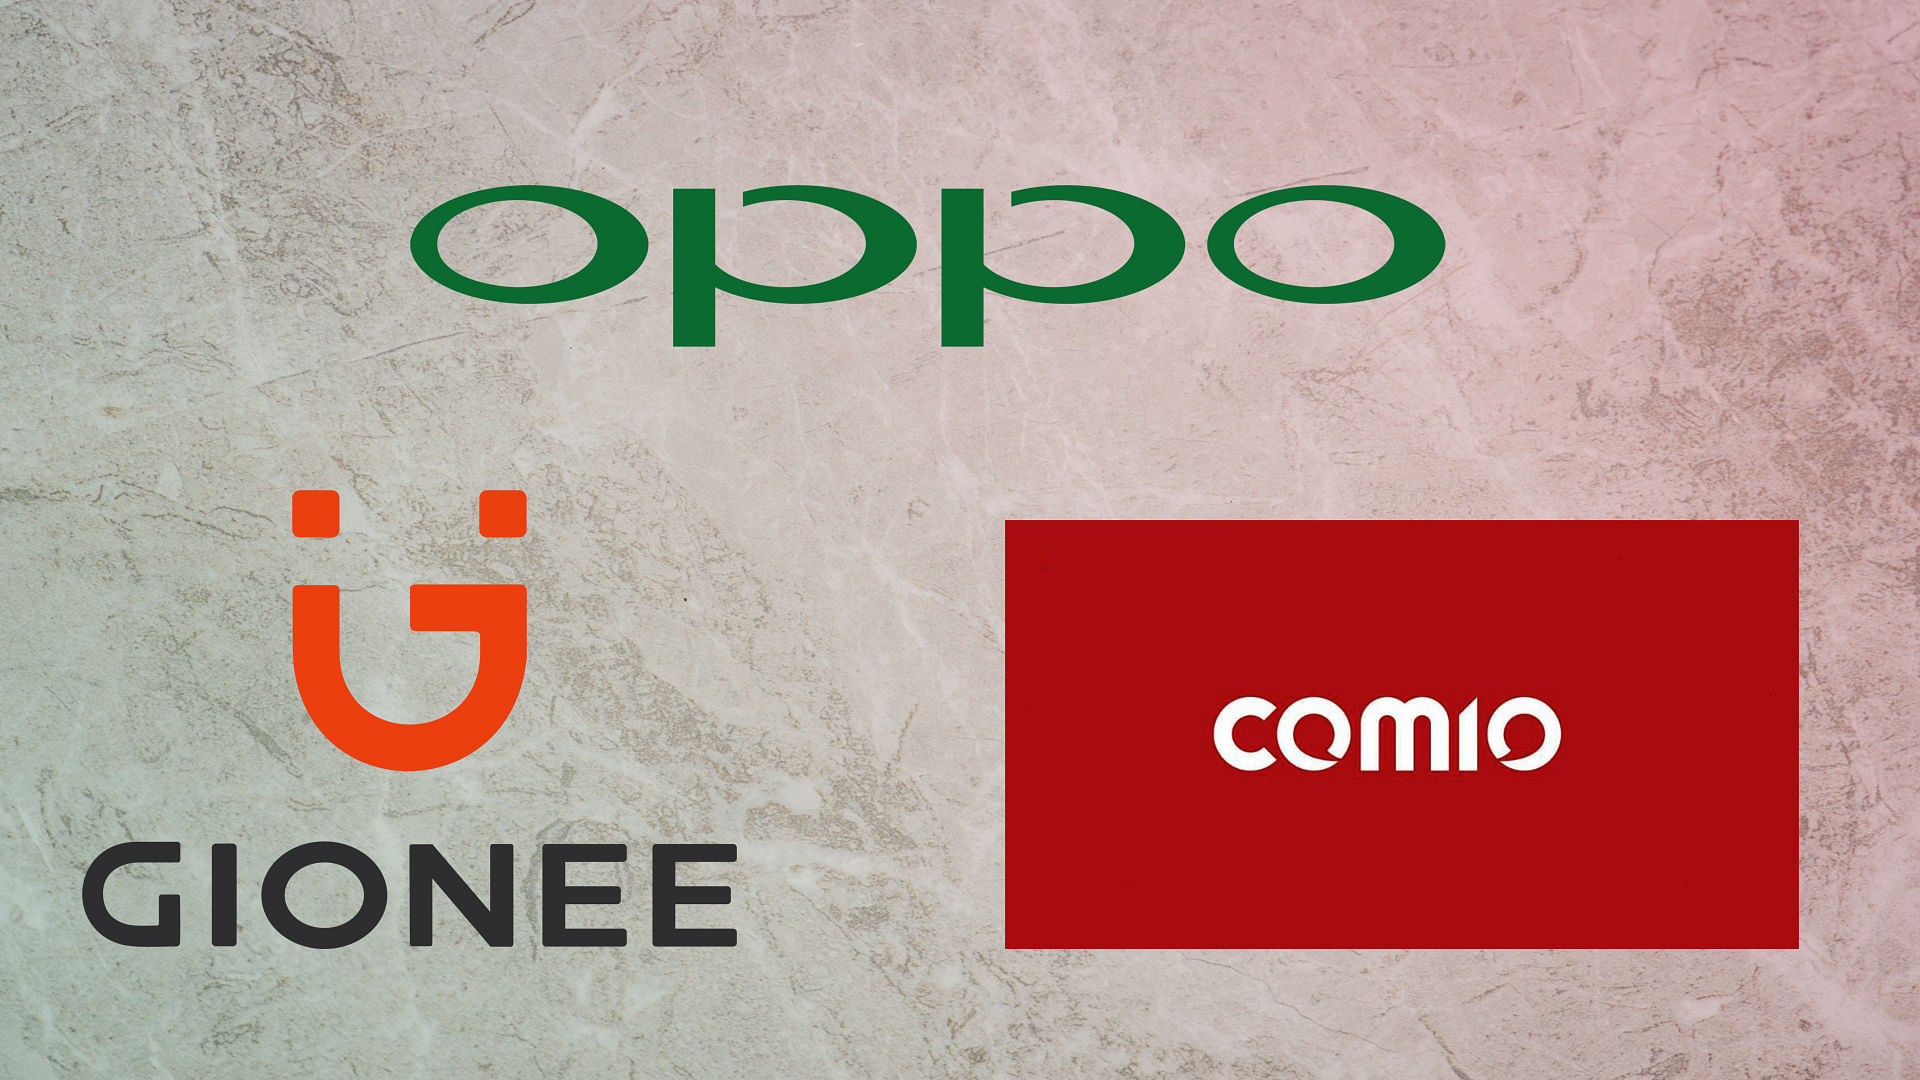 Smartphone brands like Comio have exited the Indian smartphone market.